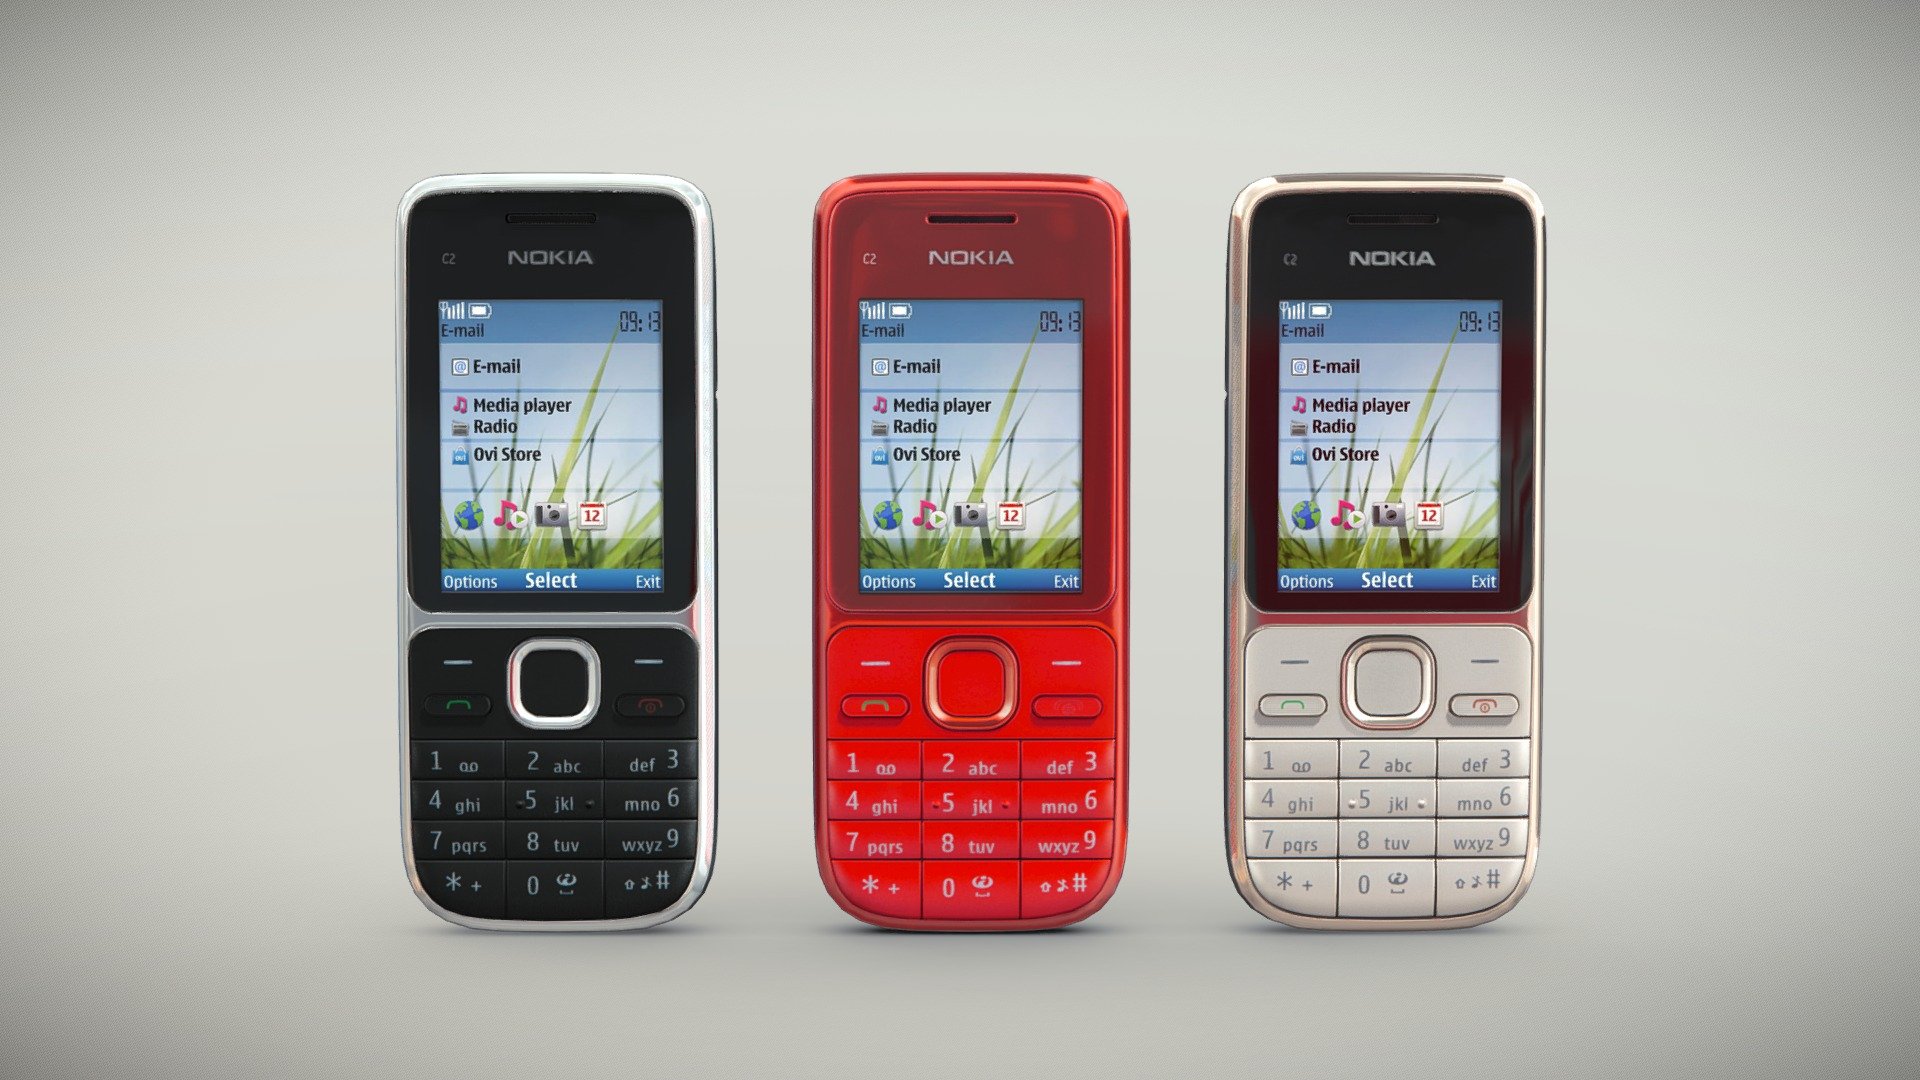 •   Let me present to you high-quality low-poly 3D model Nokia C2-01. Model is presented in three colors: Red, Black and Warm Silver.  Modeling was made with ortho-photos of real phone that is why all details of design are recreated most authentically.

•    This model consists of one mesh, it is low-polygonal and it has only one material for each color version.

•   The total of the main textures is 5. Resolution of all textures is 4096 pixels square aspect ratio in .png format. Also there is original texture file .PSD format in separate archive.

•   Polygon count of the model is – 1394.

•   The model has correct dimensions in real-world scale. All parts grouped and named correctly.

•   To use the model in other 3D programs there are scenes saved in formats .fbx, .obj, .DAE, .max (2010 version).

Note: If you see some artifacts on the textures, it means compression works in the Viewer. We recommend setting HD quality for textures. But anyway, original textures have no artifacts 3d model